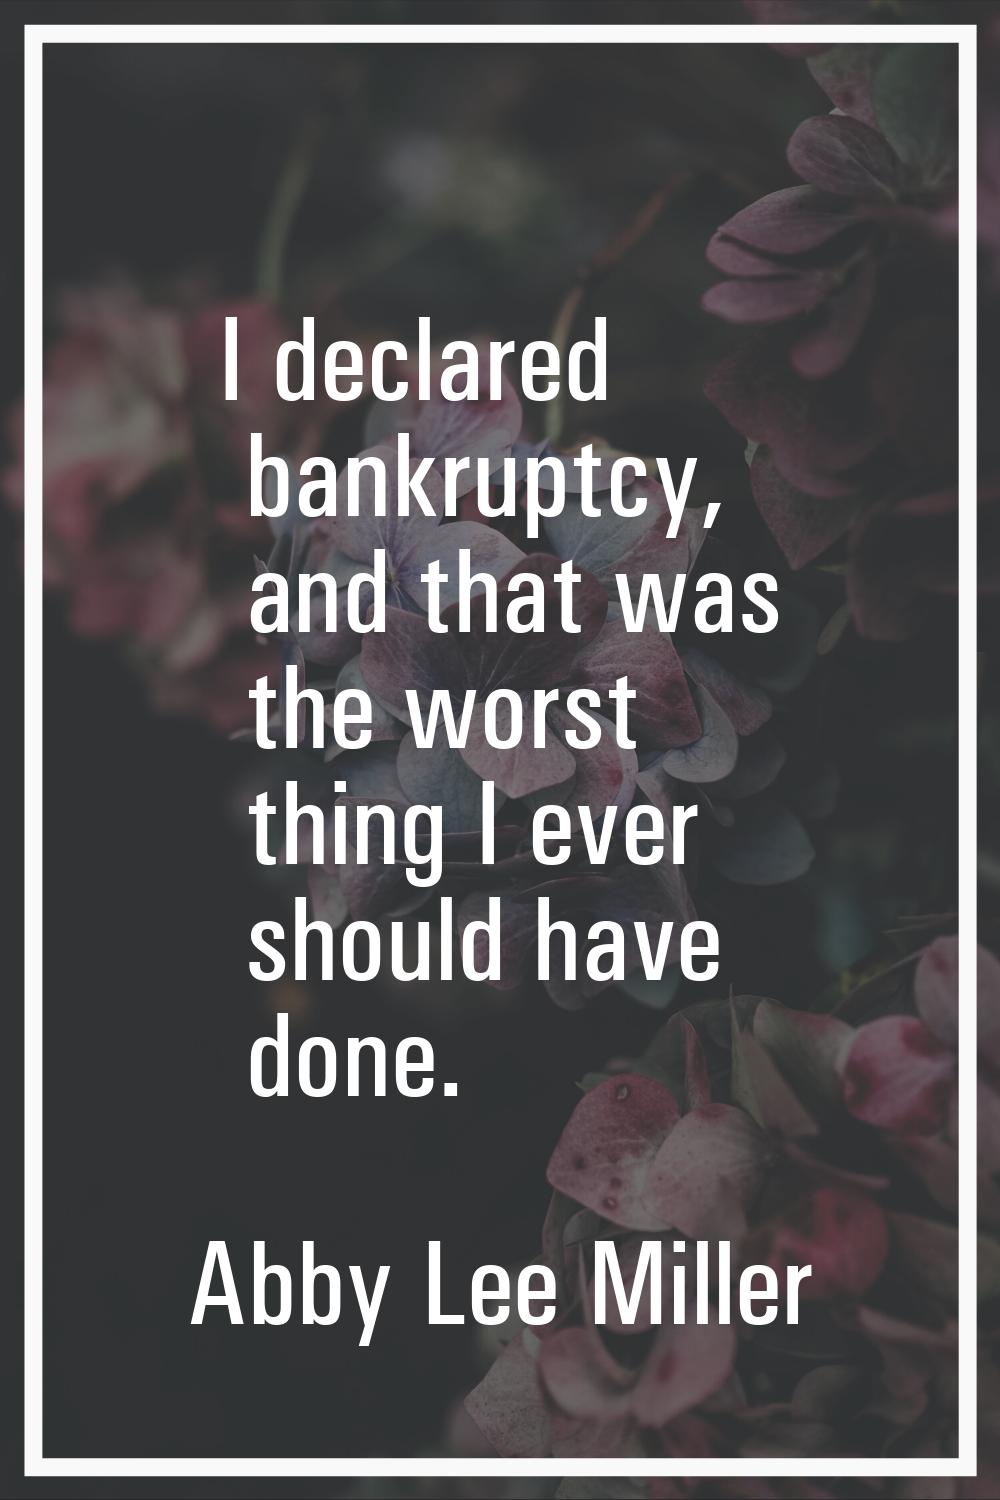 I declared bankruptcy, and that was the worst thing I ever should have done.